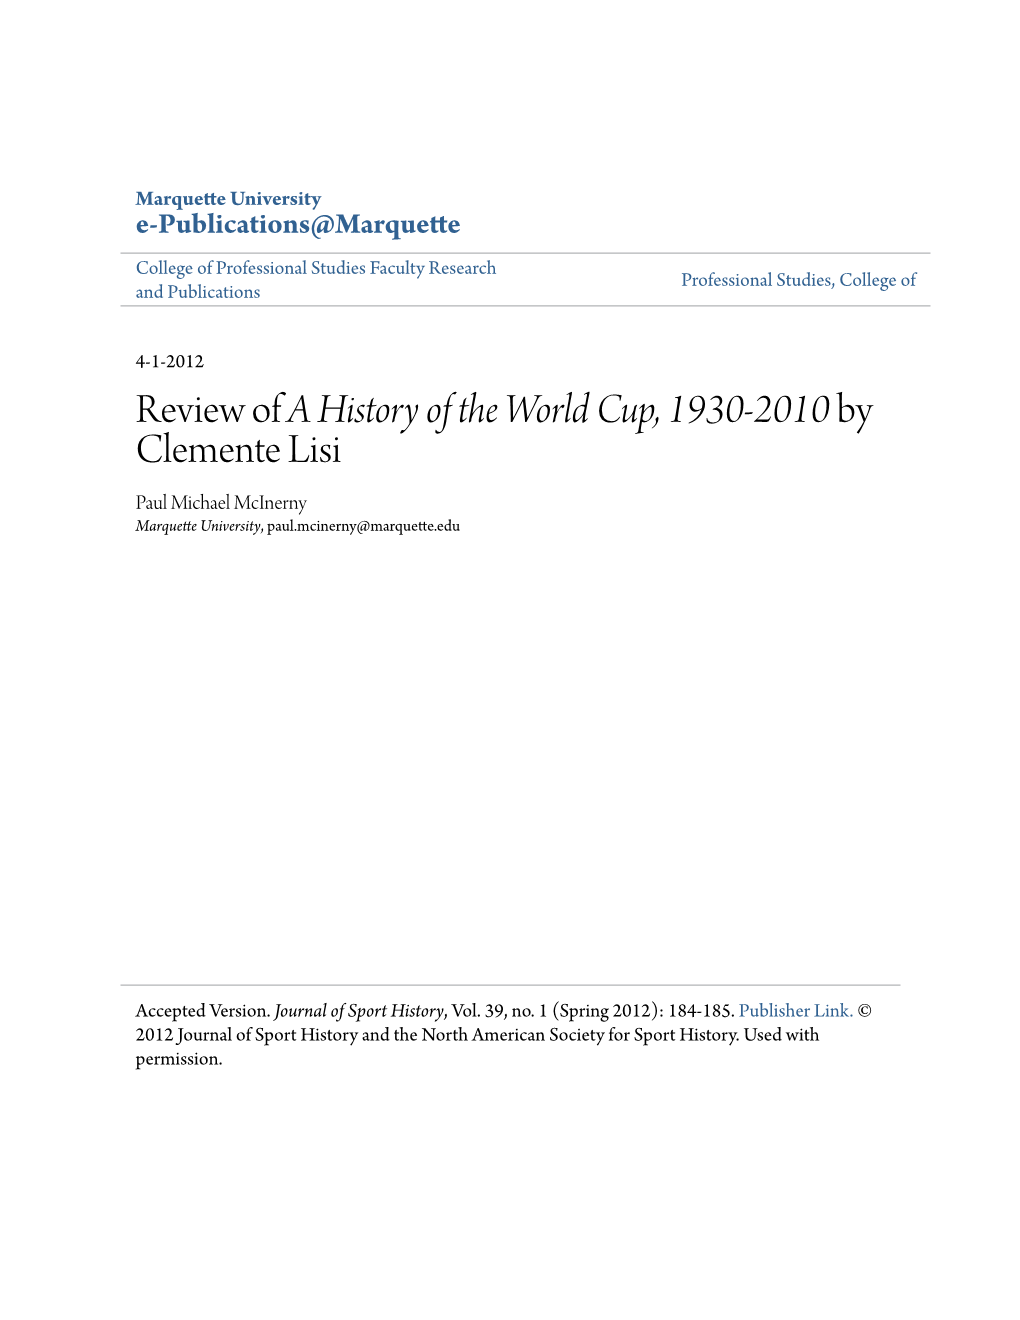 Review of a History of the World Cup, 1930-2010 by Clemente Lisi Paul Michael Mcinerny Marquette University, Paul.Mcinerny@Marquette.Edu